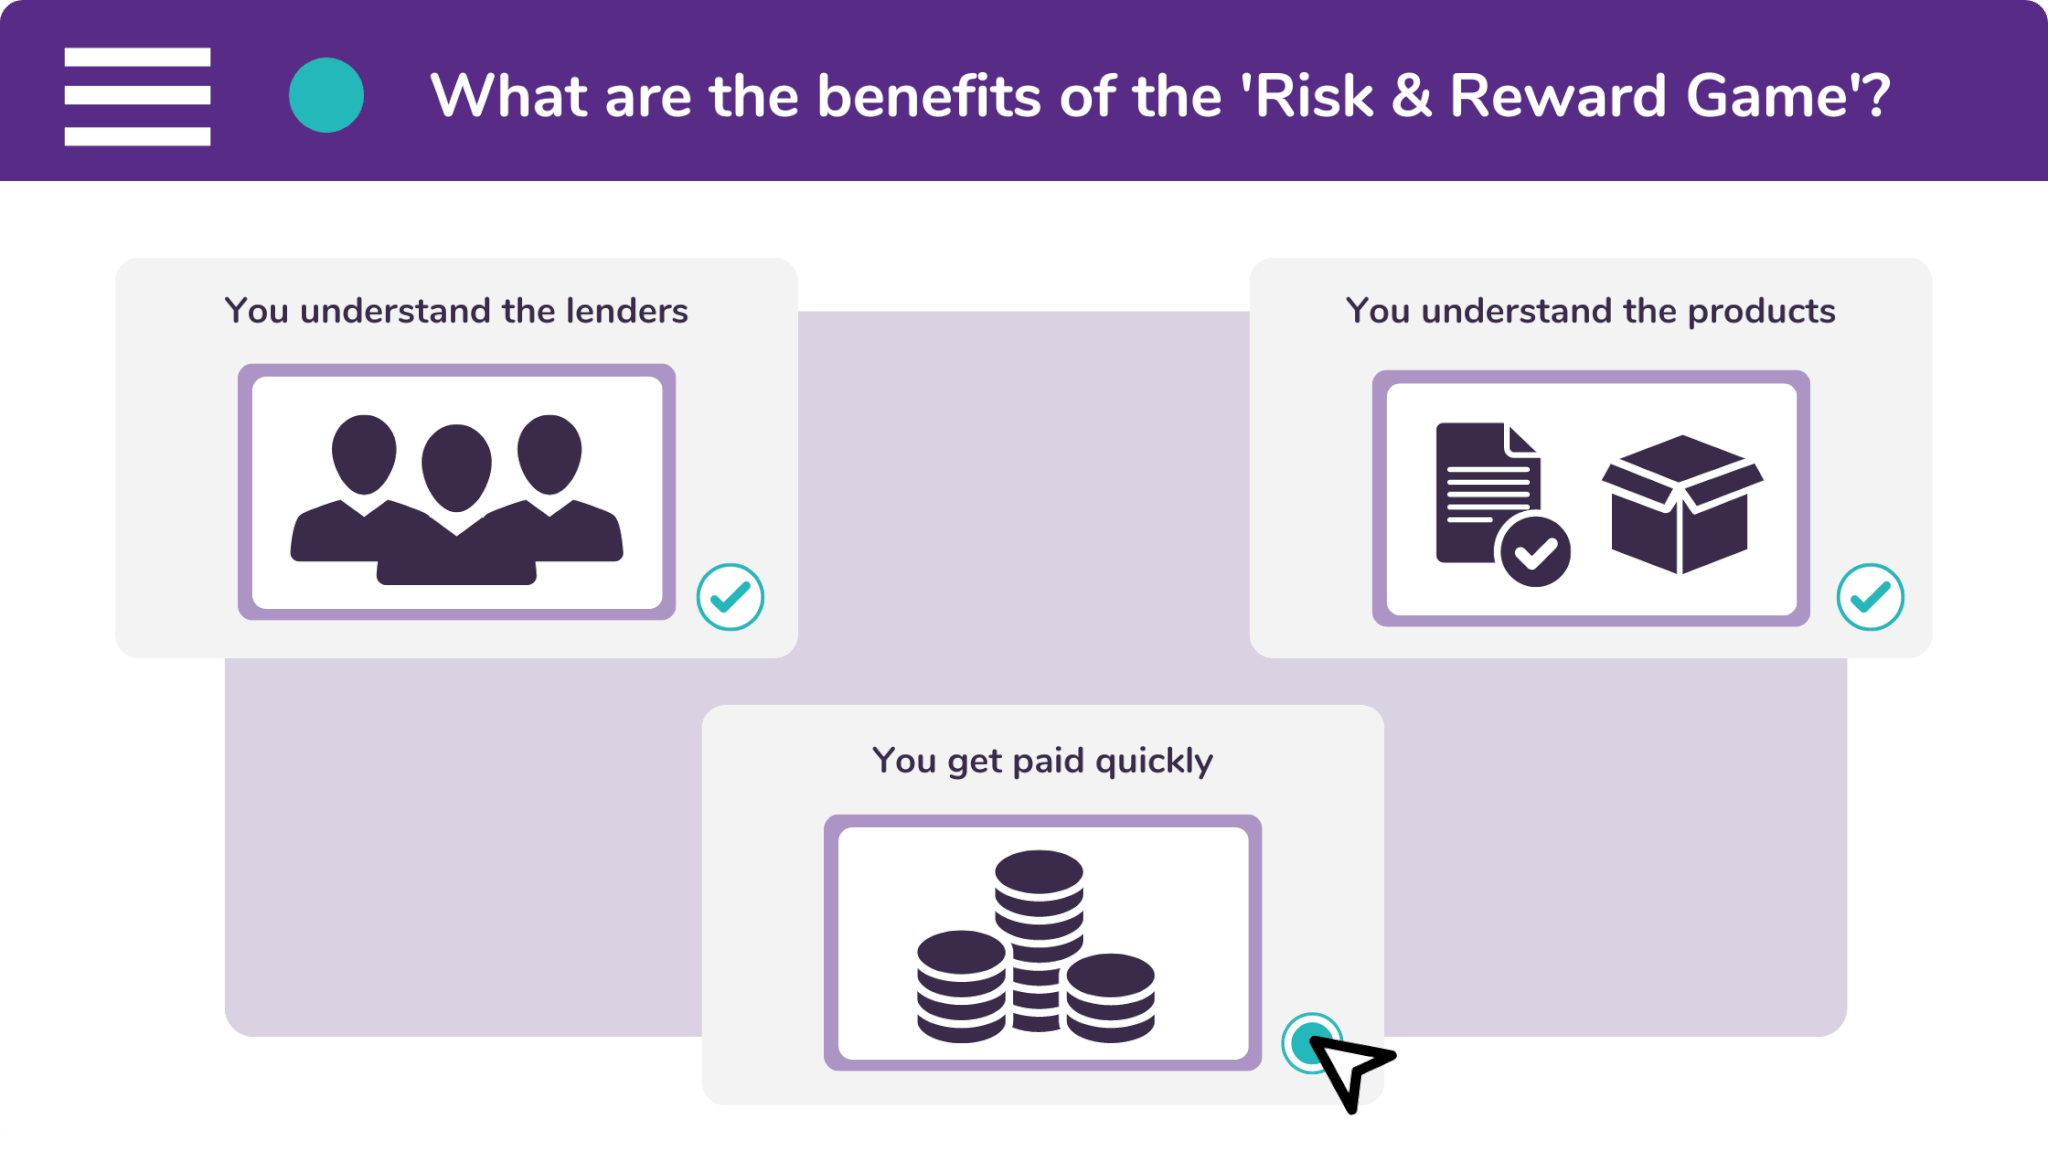 There are three main benefits of familiarizing yourself with the 'Risk and Reward Game'.